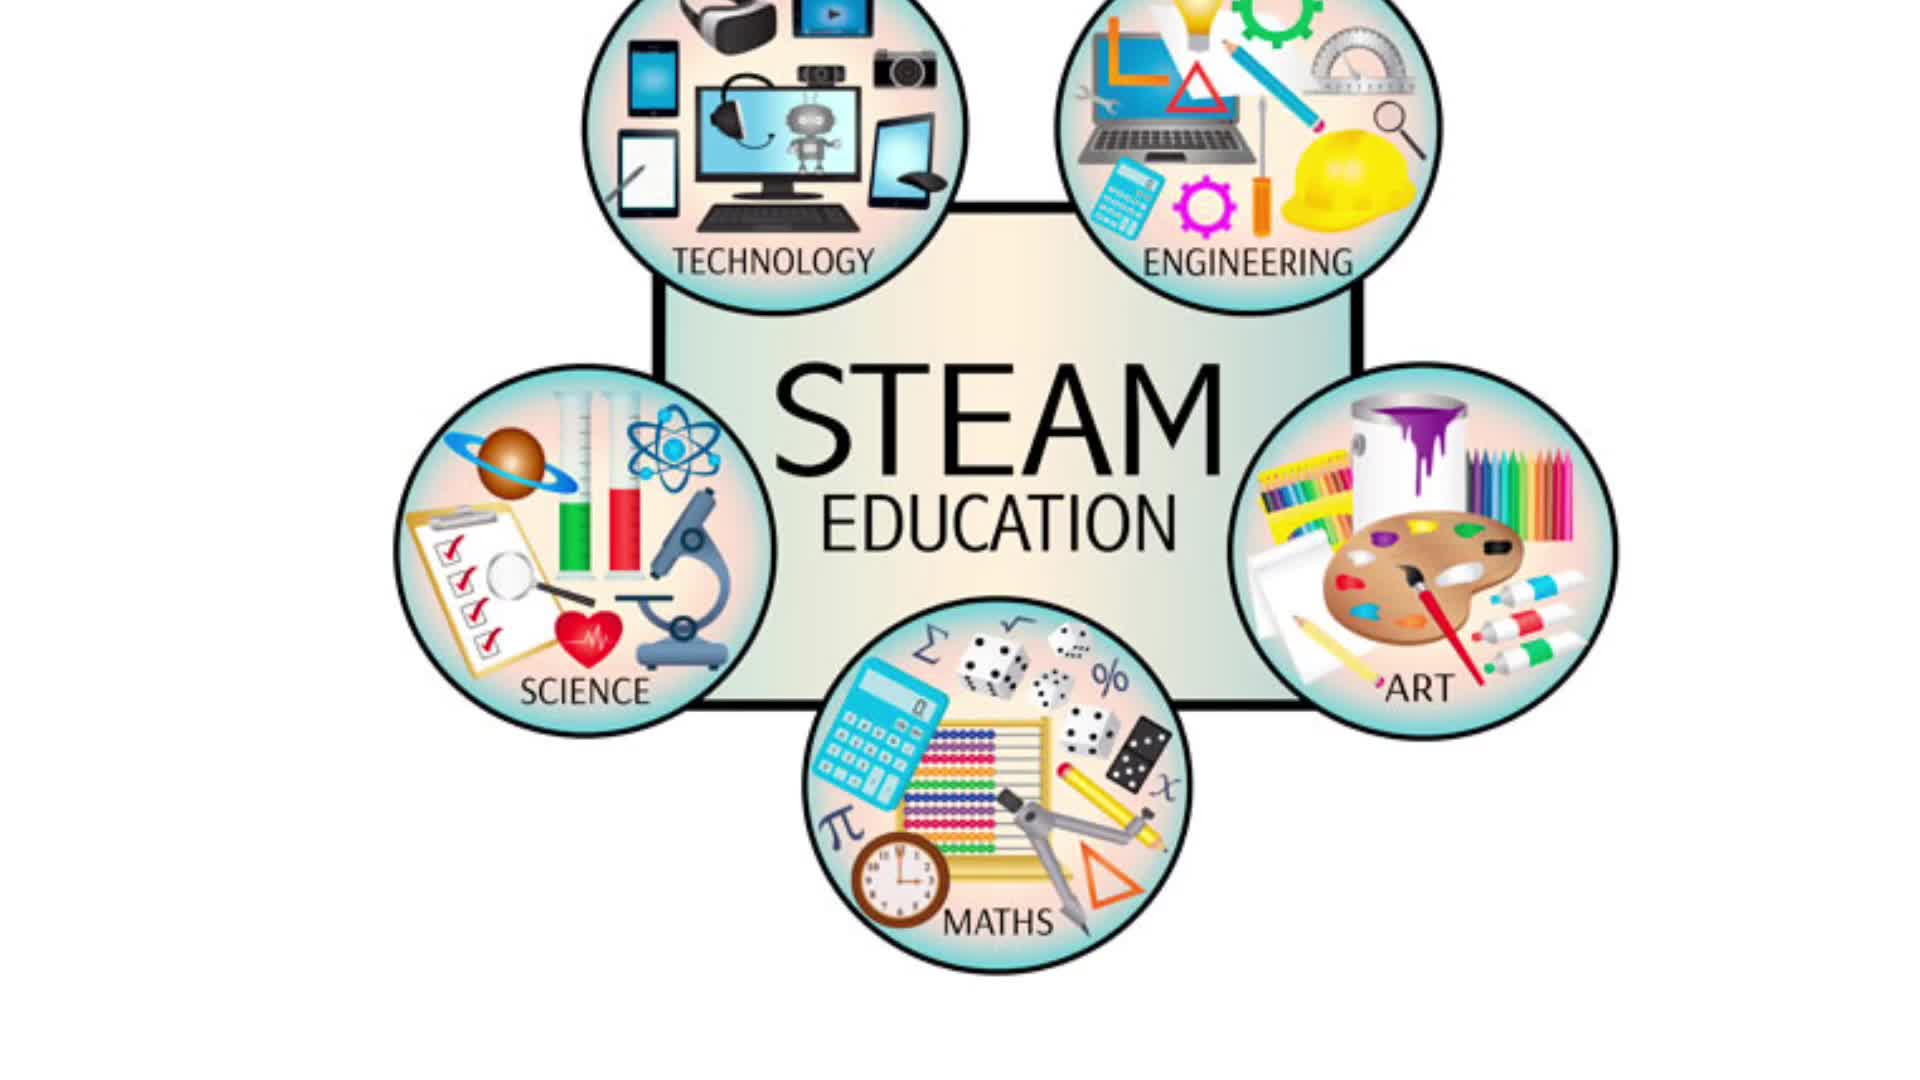 Steam science technology engineering and math фото 66